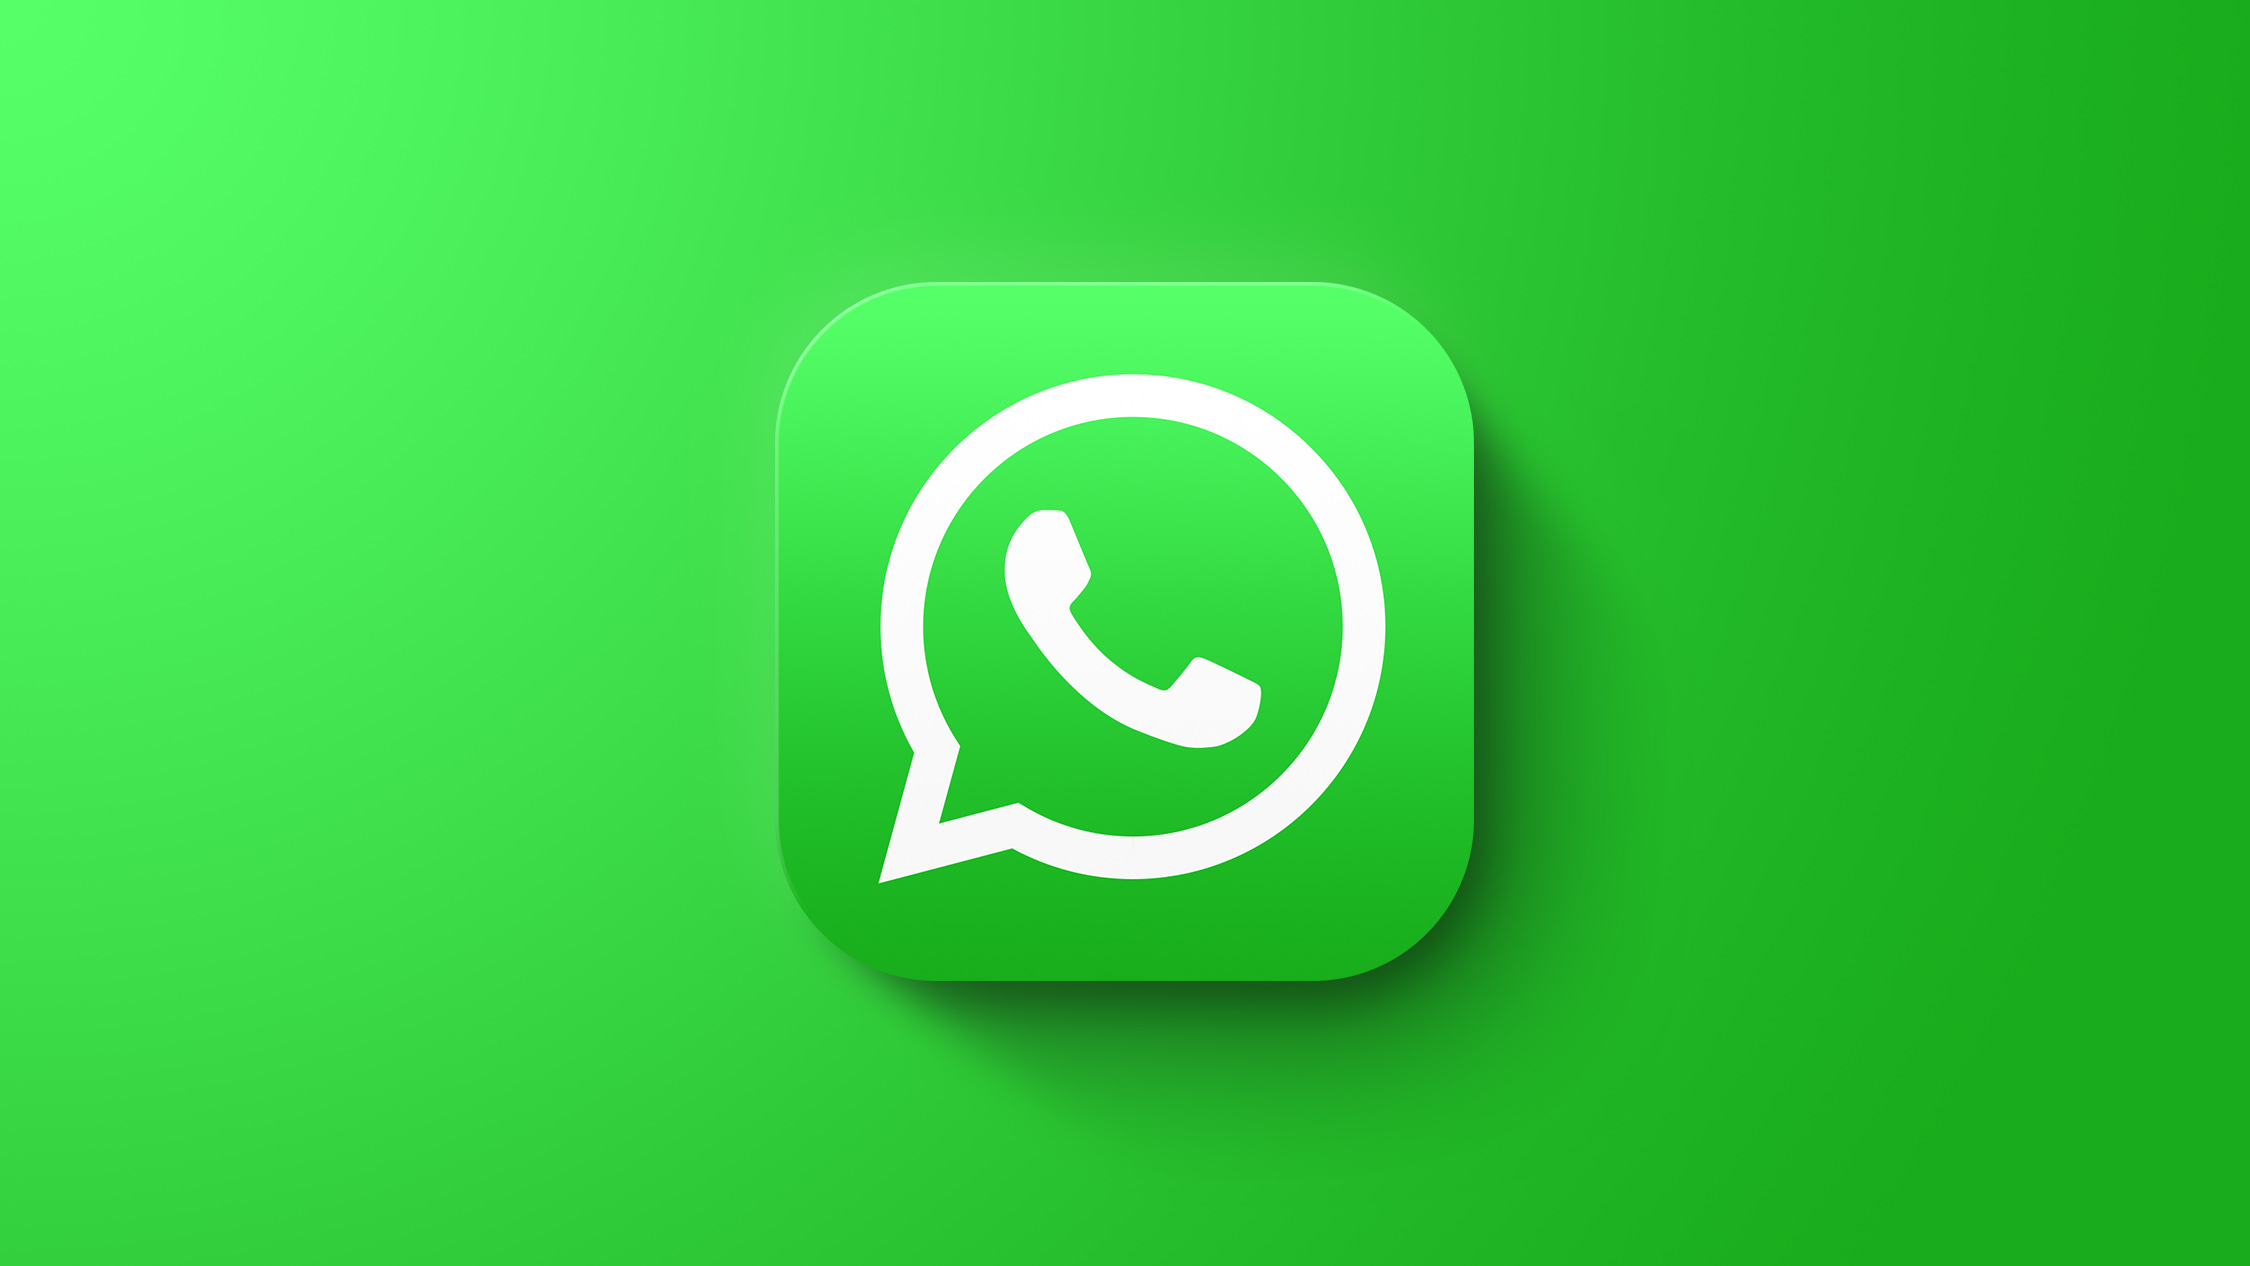 WhatsApp Improving Video Calling With Support for More People, Picture in Picture